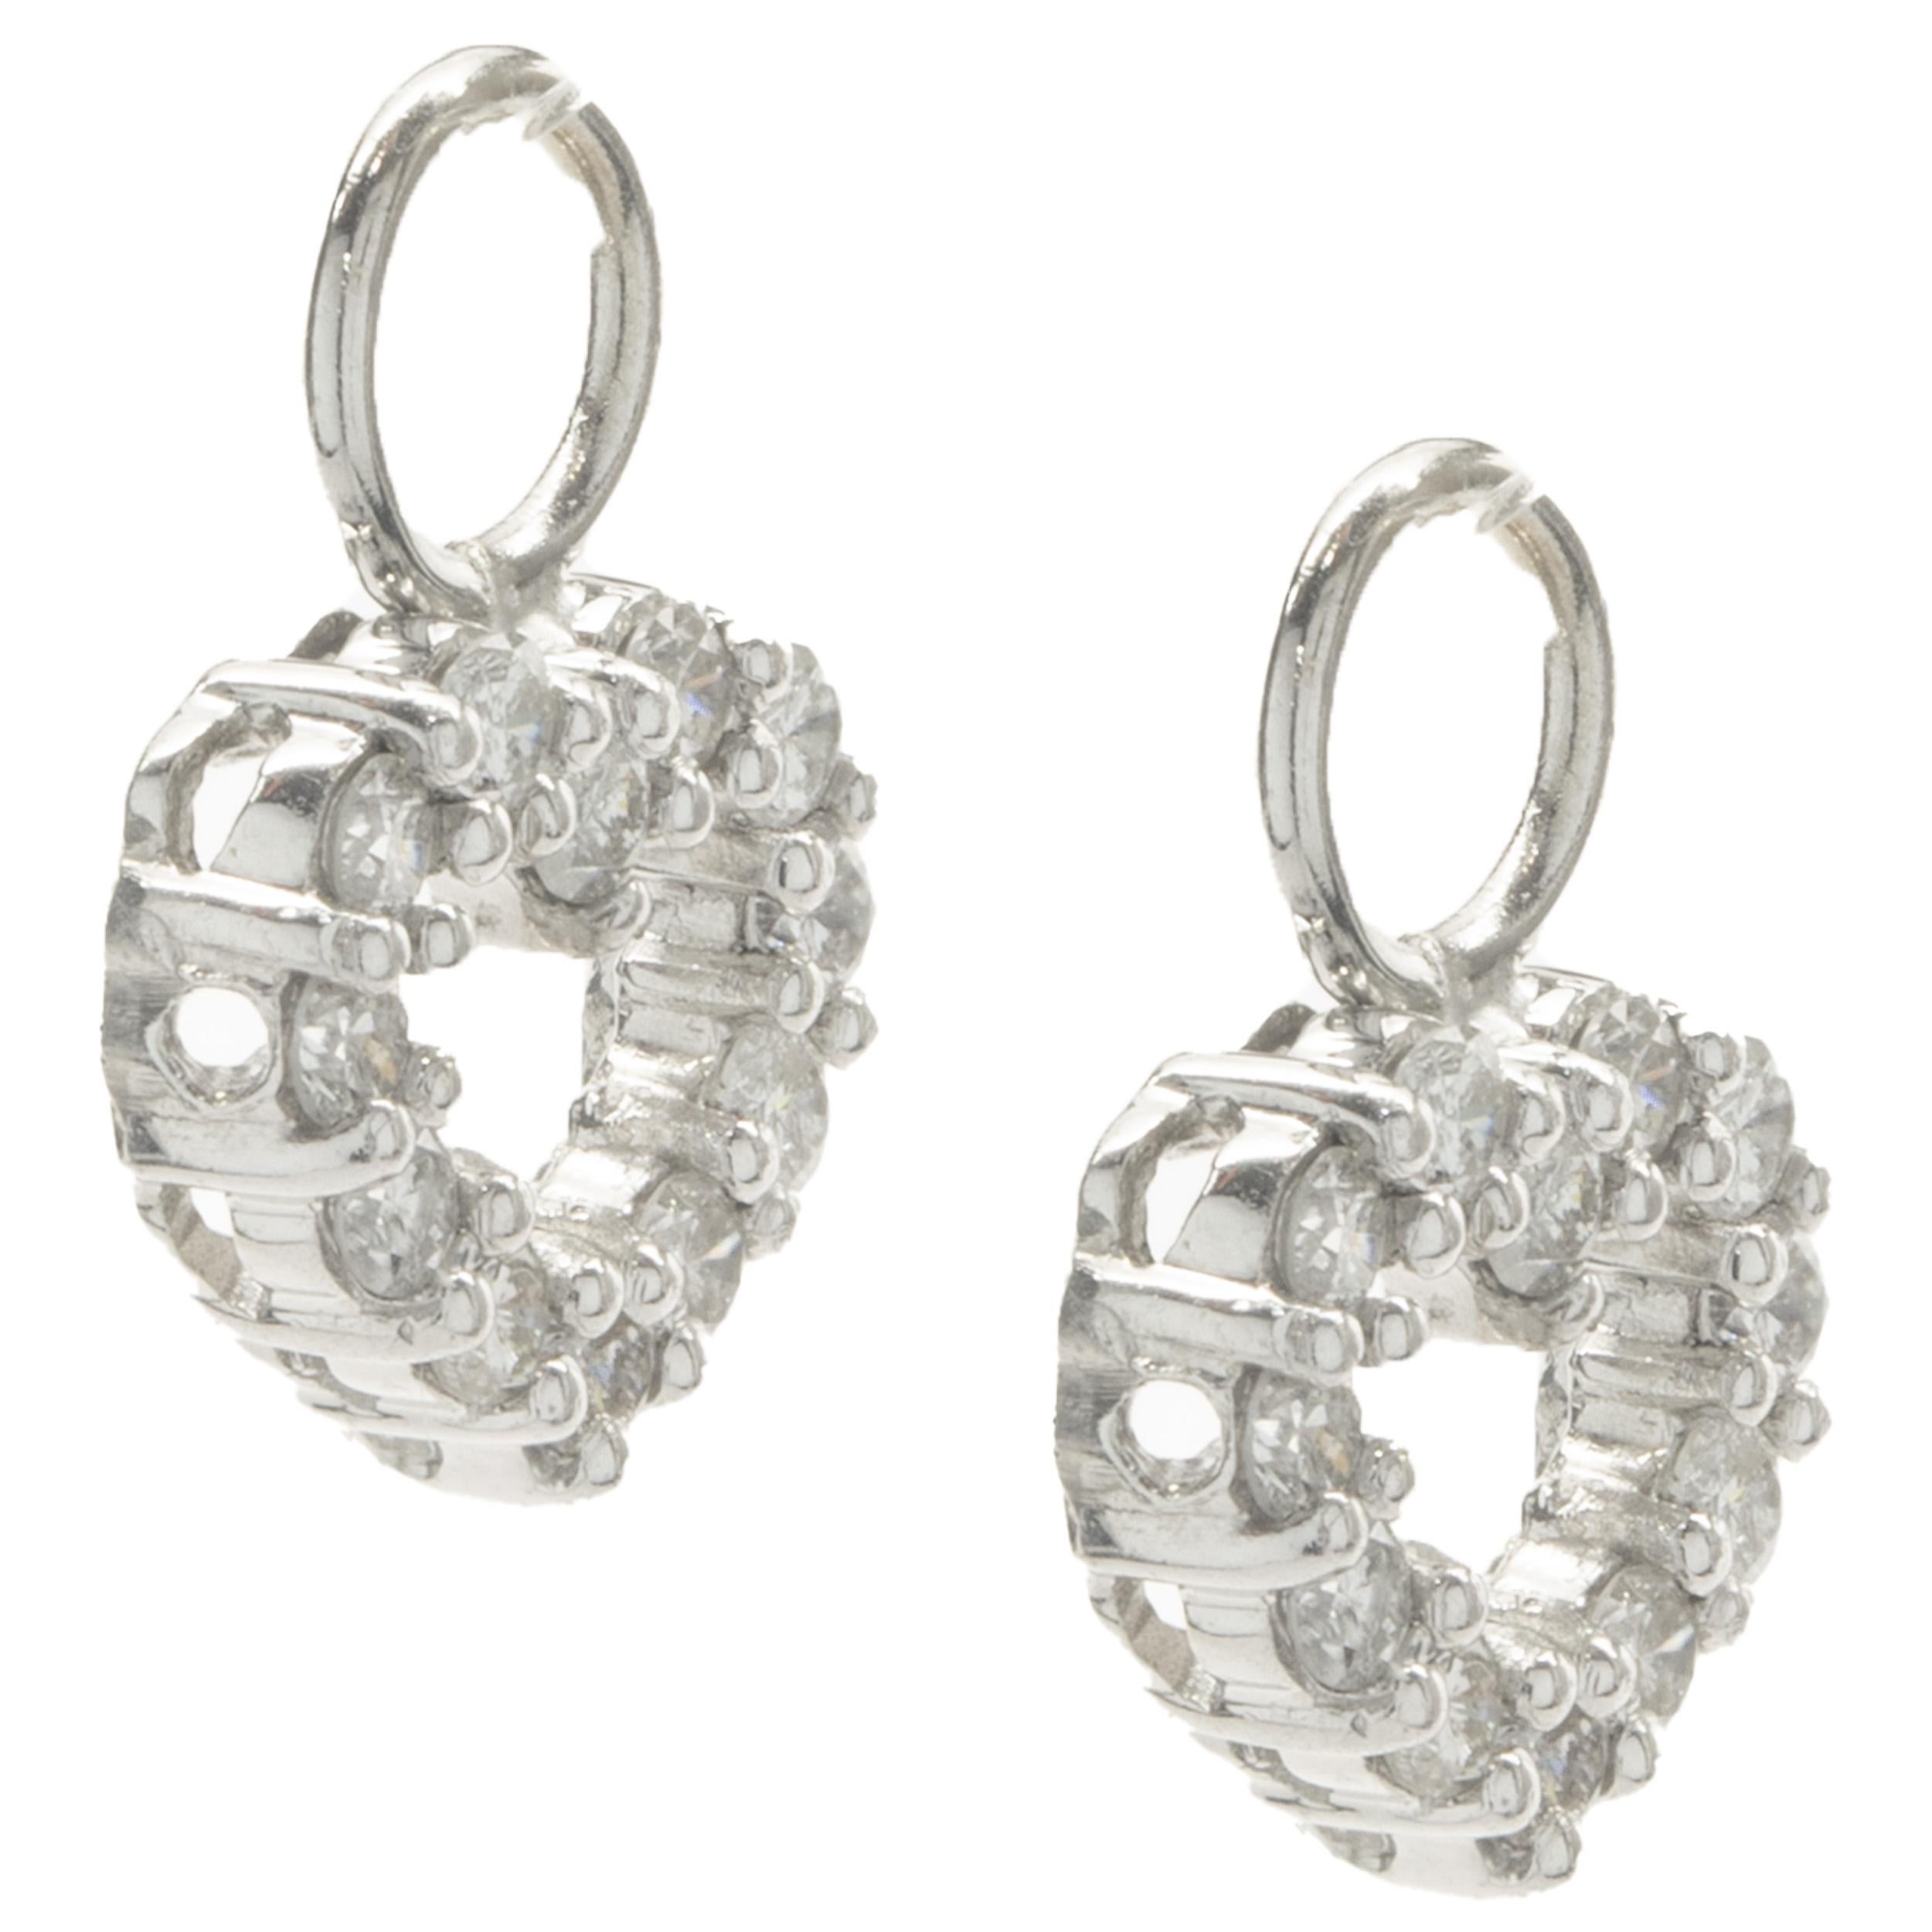 Designer: custom design
Material: 14K white gold
Diamonds: 24 round brilliant cut = 0.70cttw
Color: G
Clarity: SI1
Dimensions: earrings measure 12.60mm in length
Weight: 1.49 grams